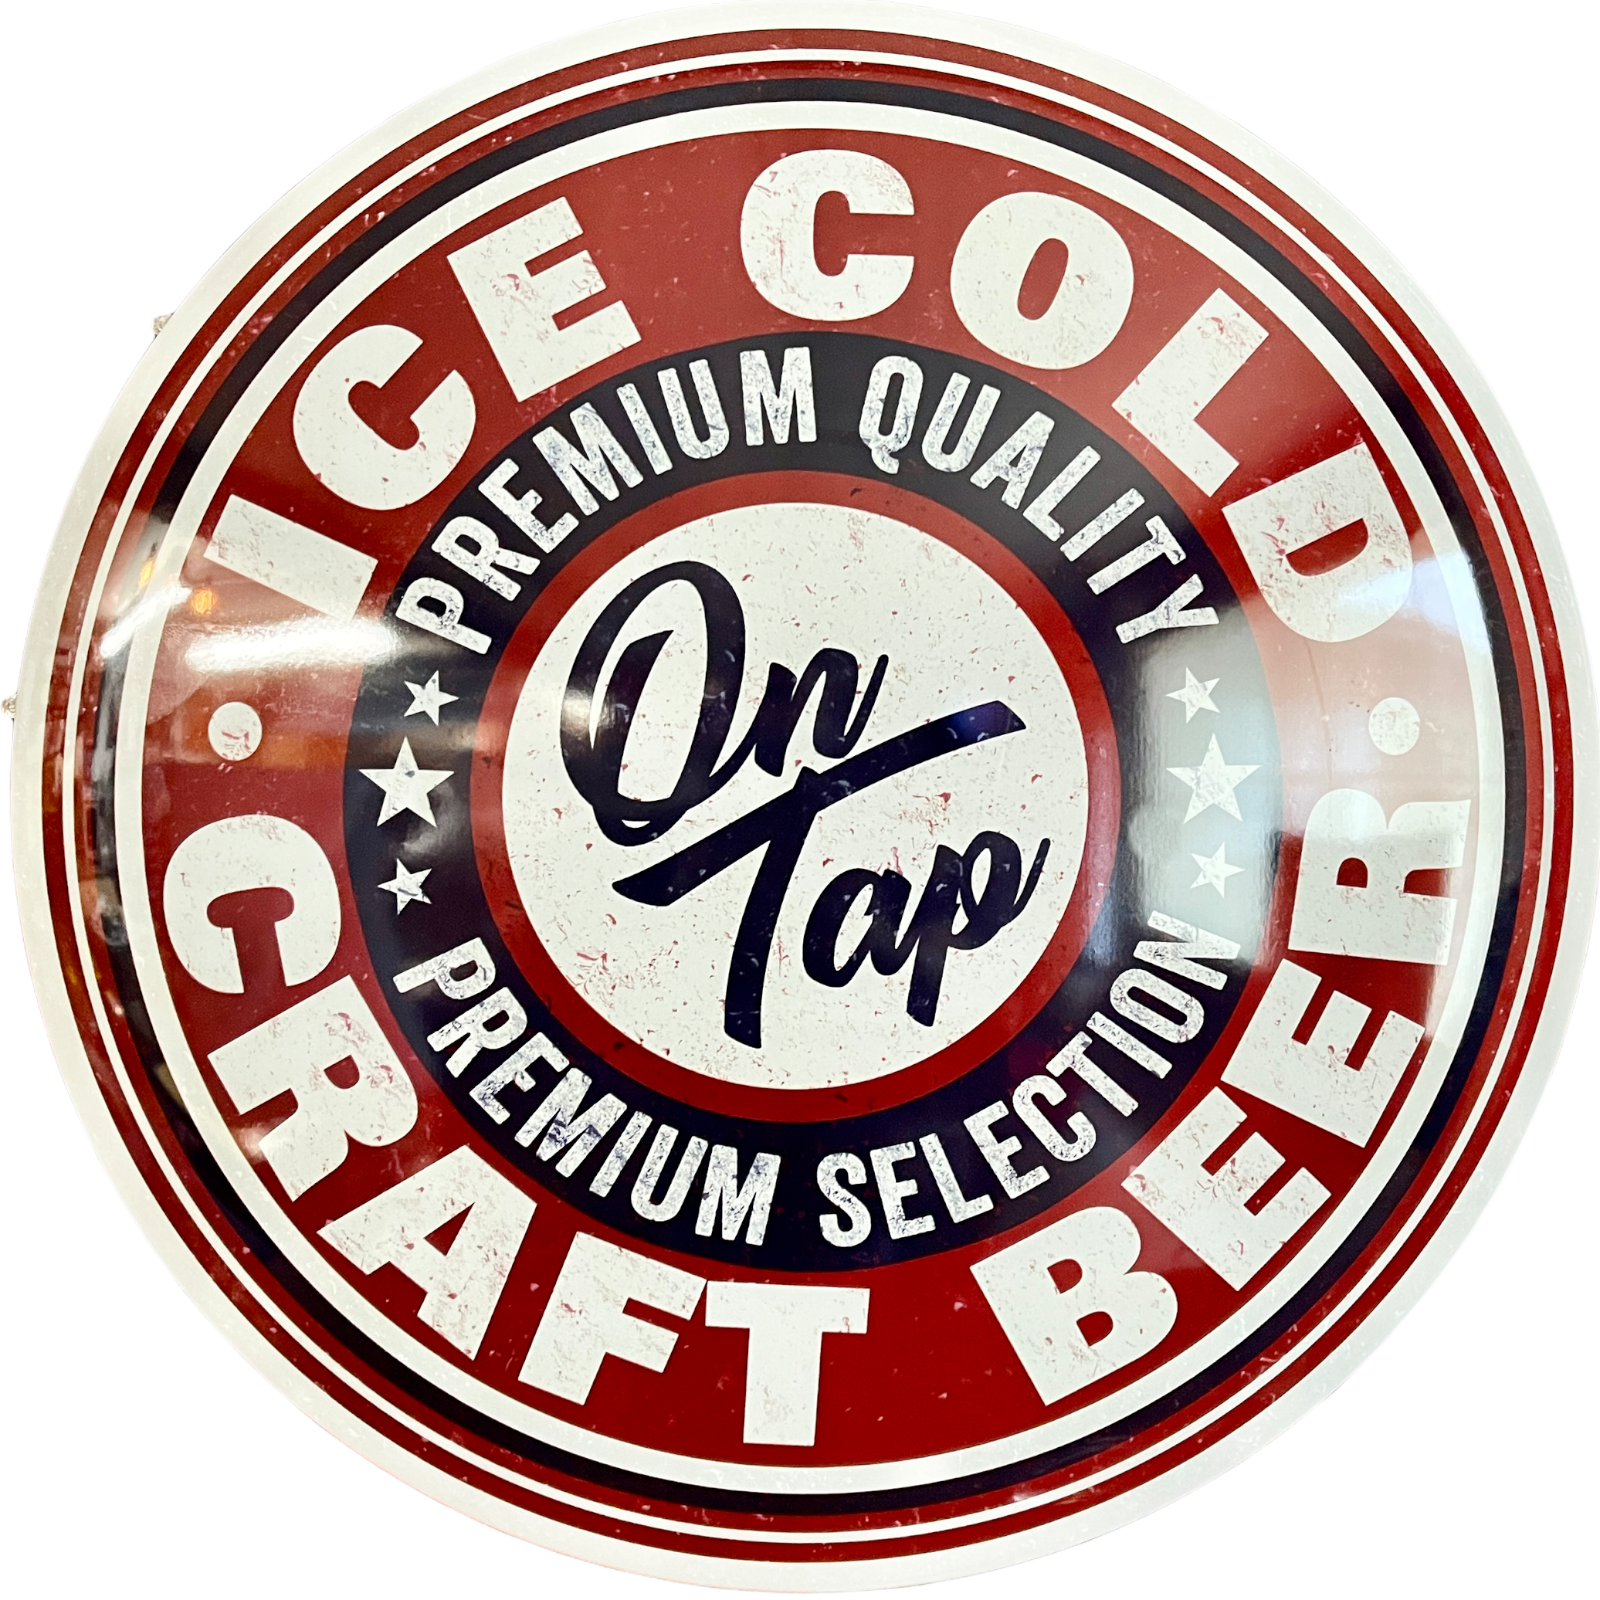 Ice Cold Craft Beer On Tap Dome Shaped Metal Sign